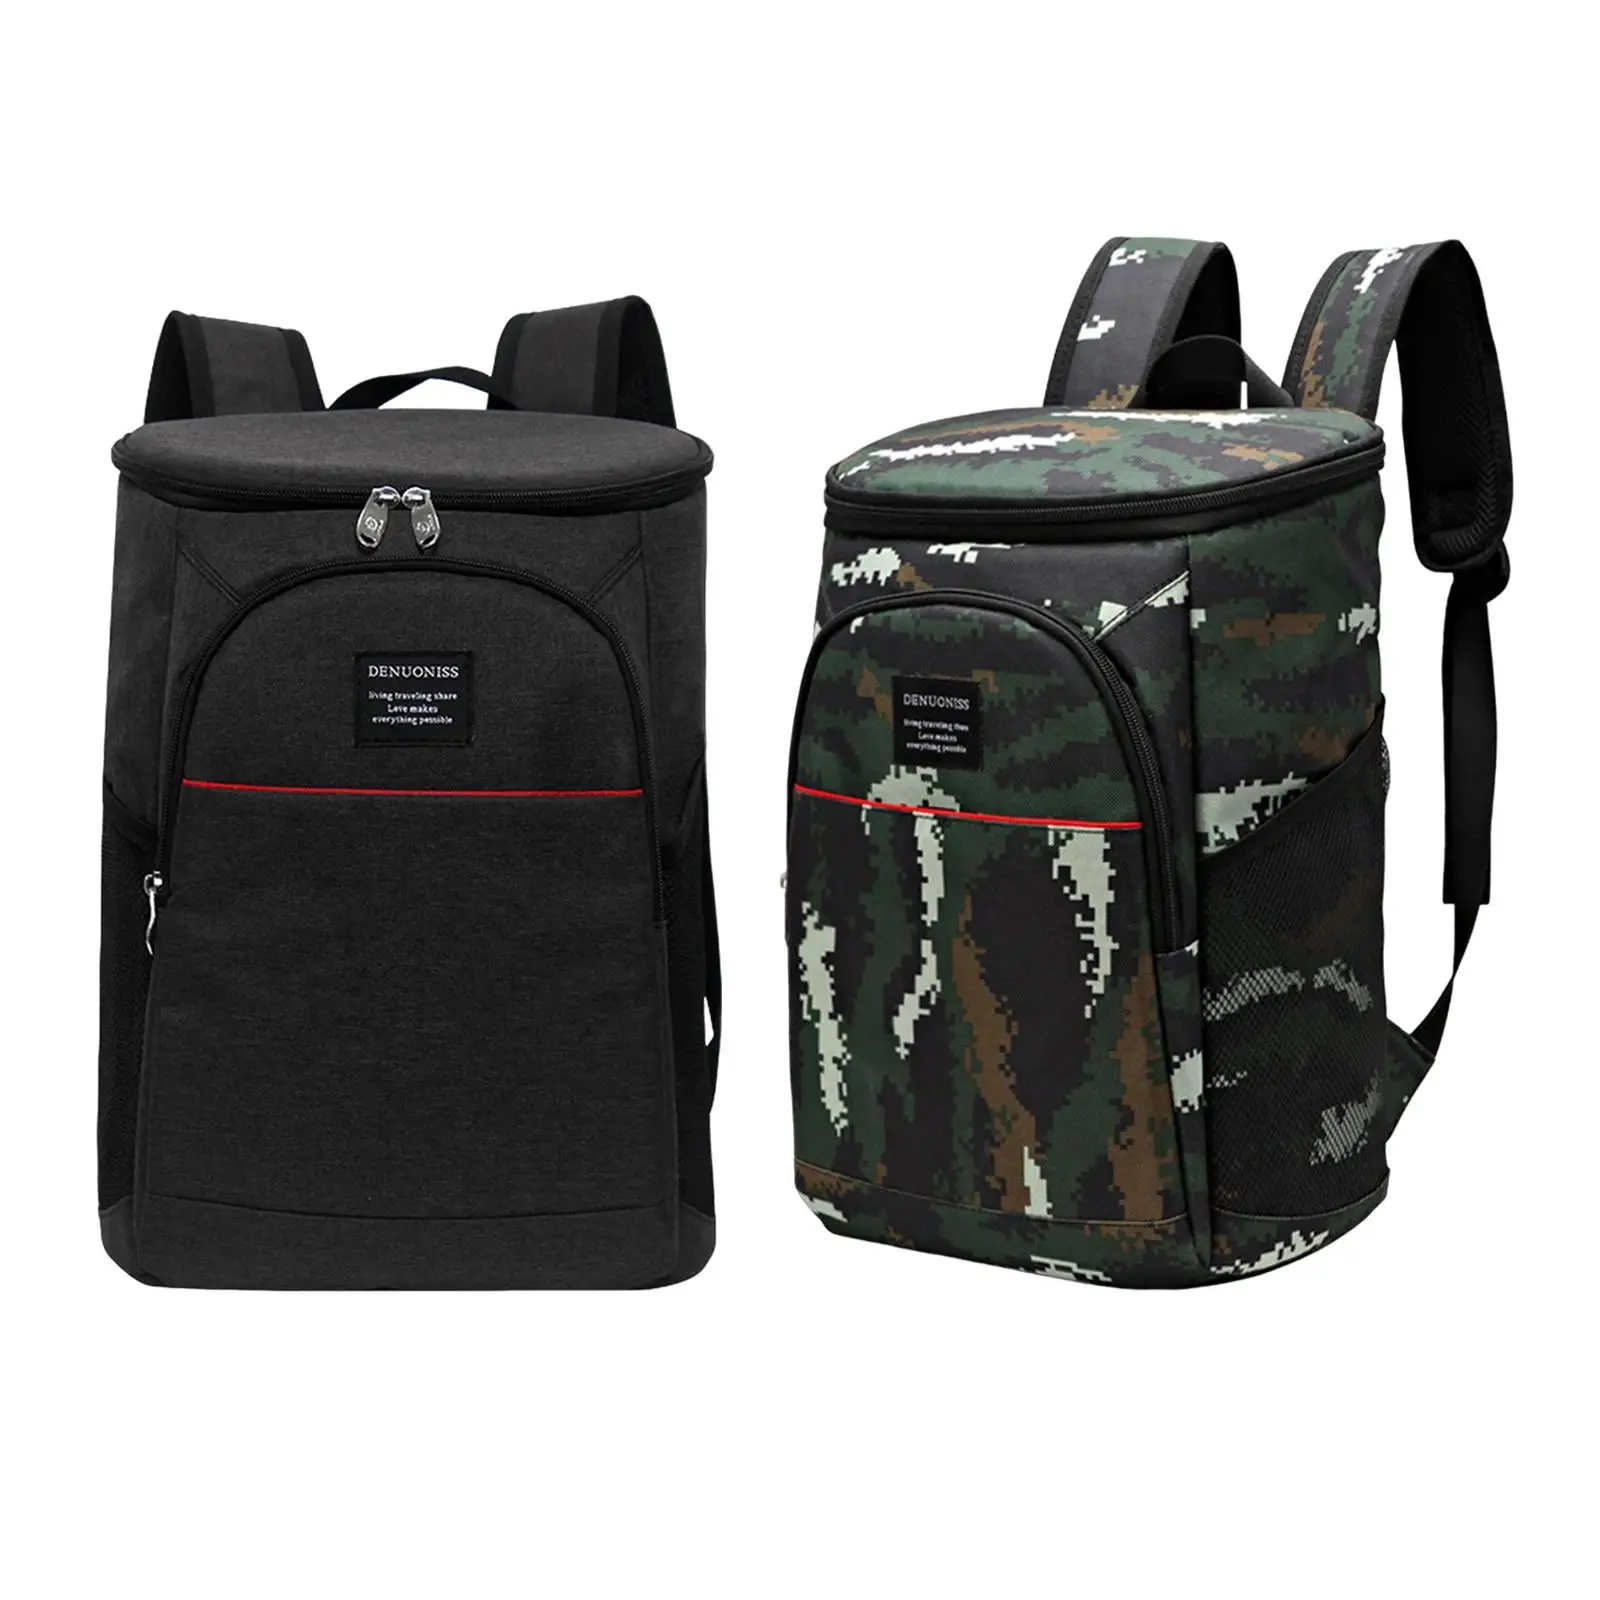 Insulated Backpack, Thermal Bag, Insulated Bag for , Insulated Bag for Travel